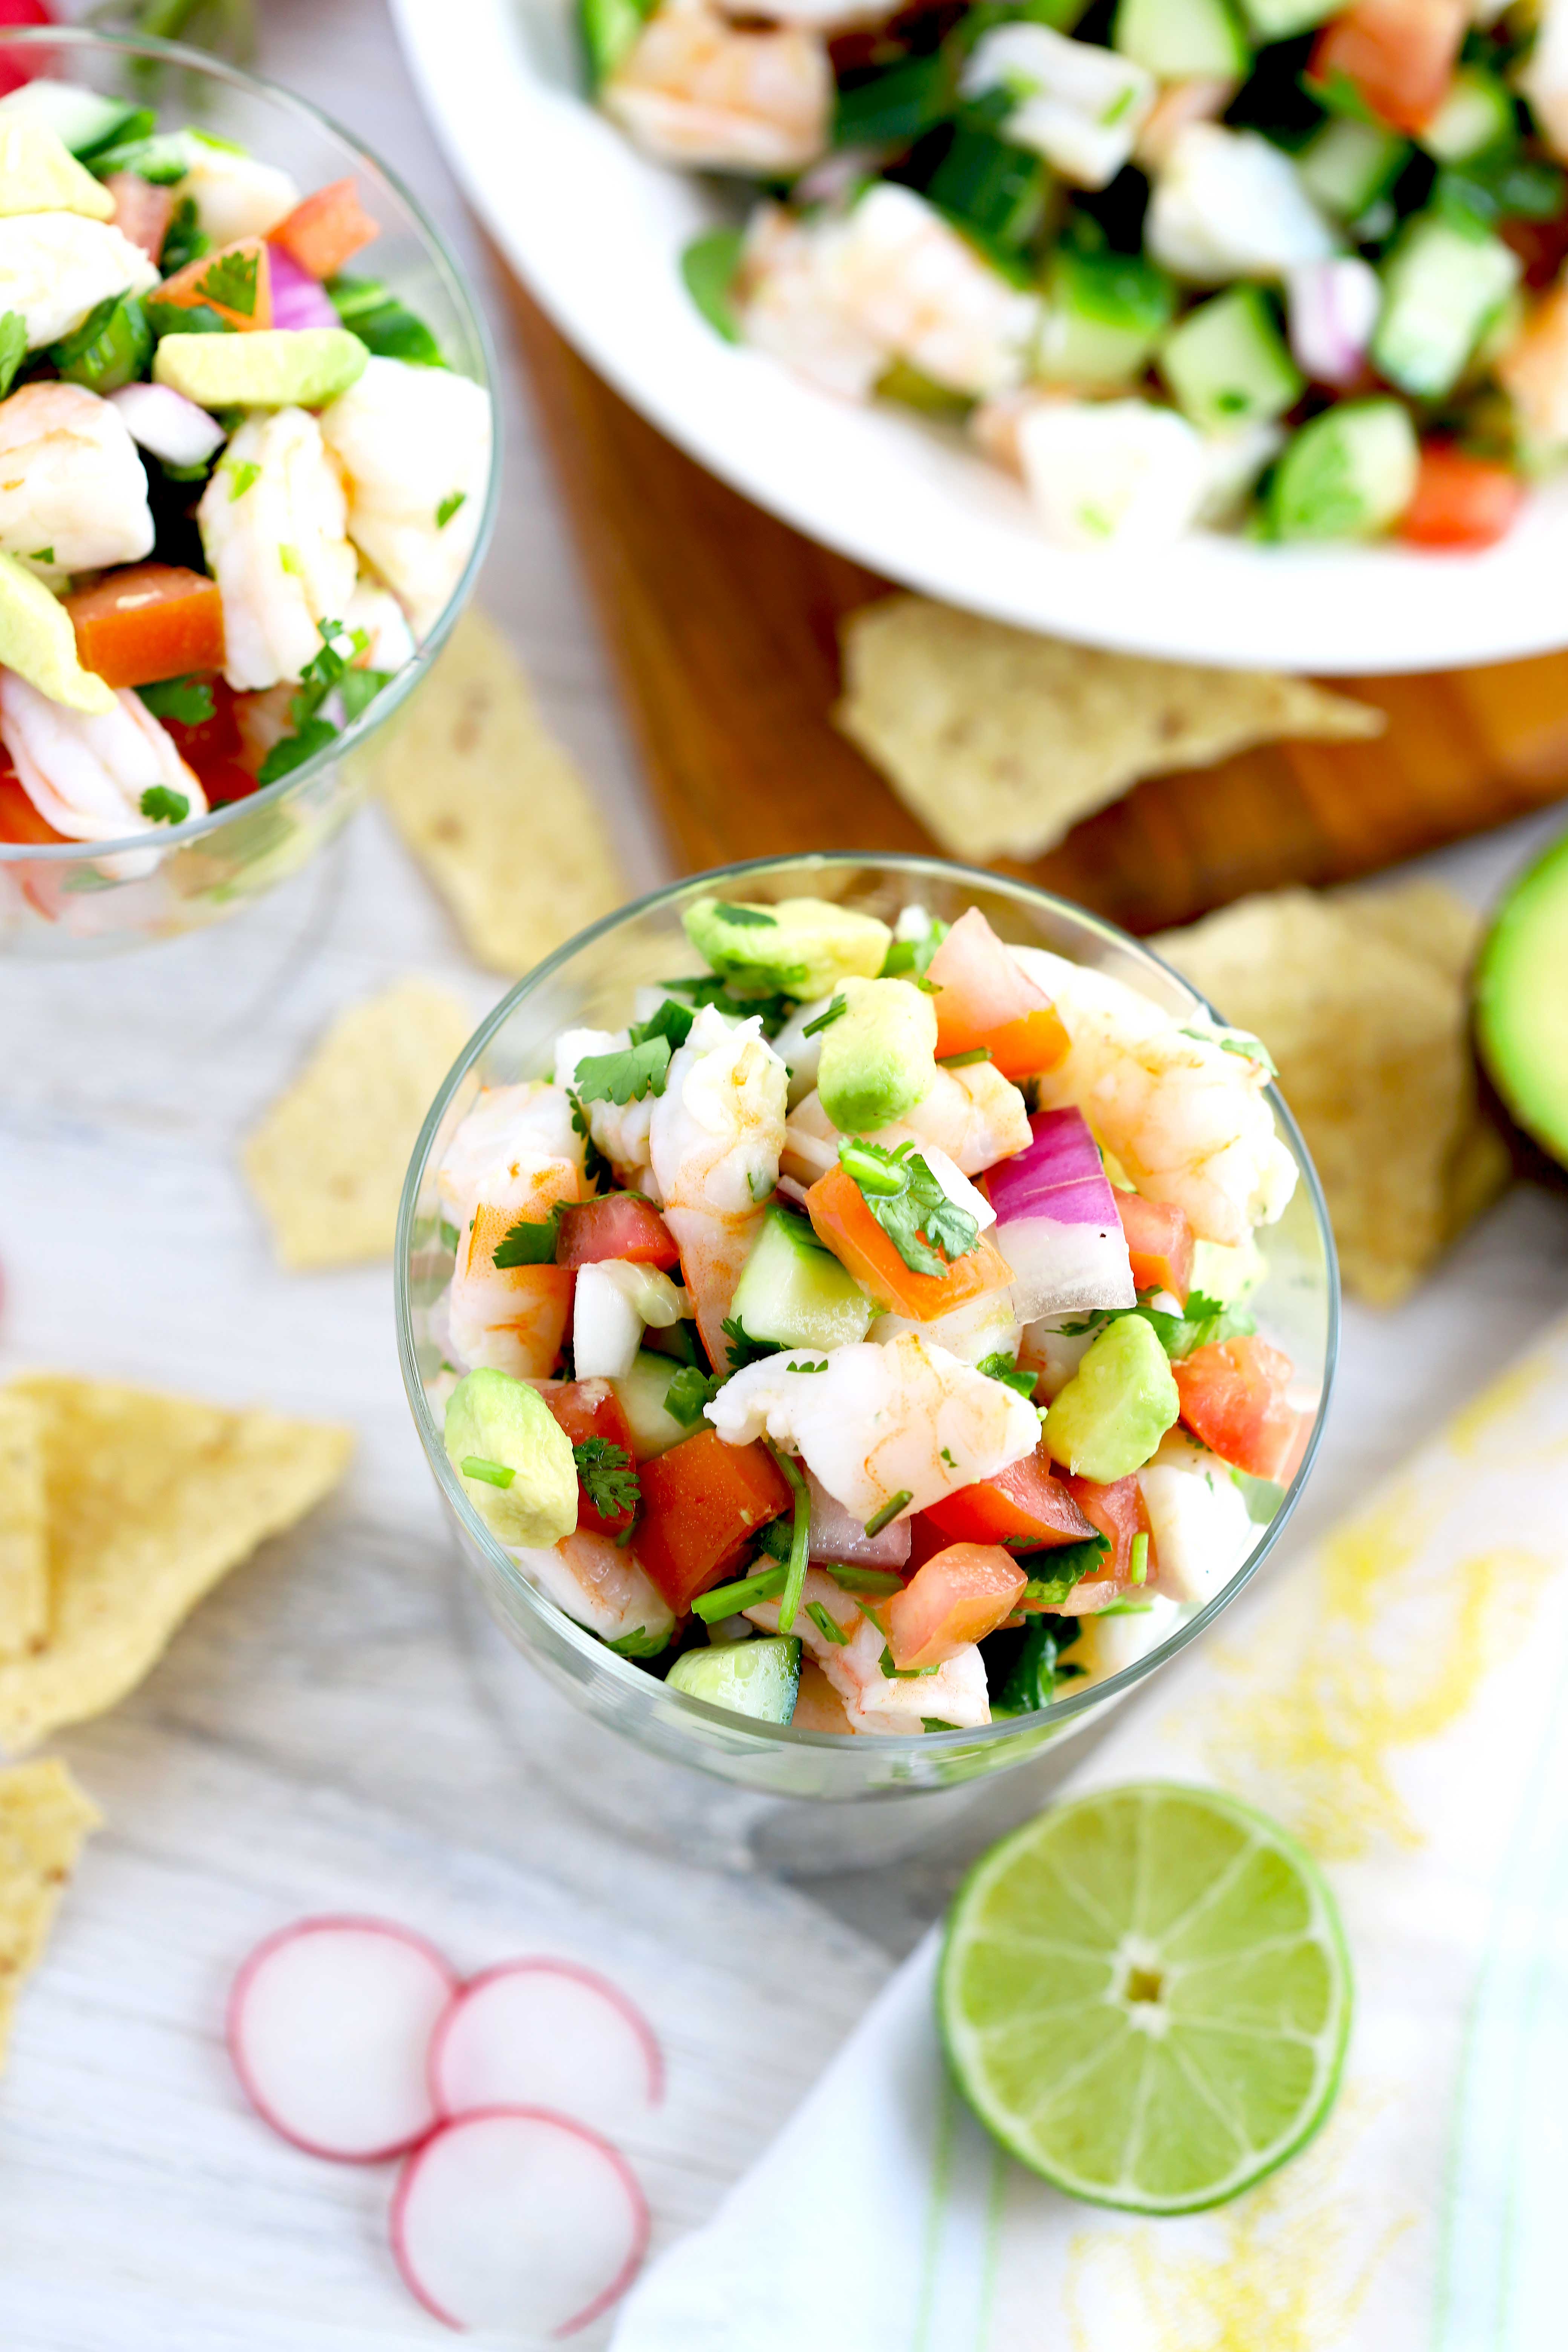 Shrimp Lime Ceviche - Ceviche Style Shrimp Cocktail With Green Grapes The Washington Post